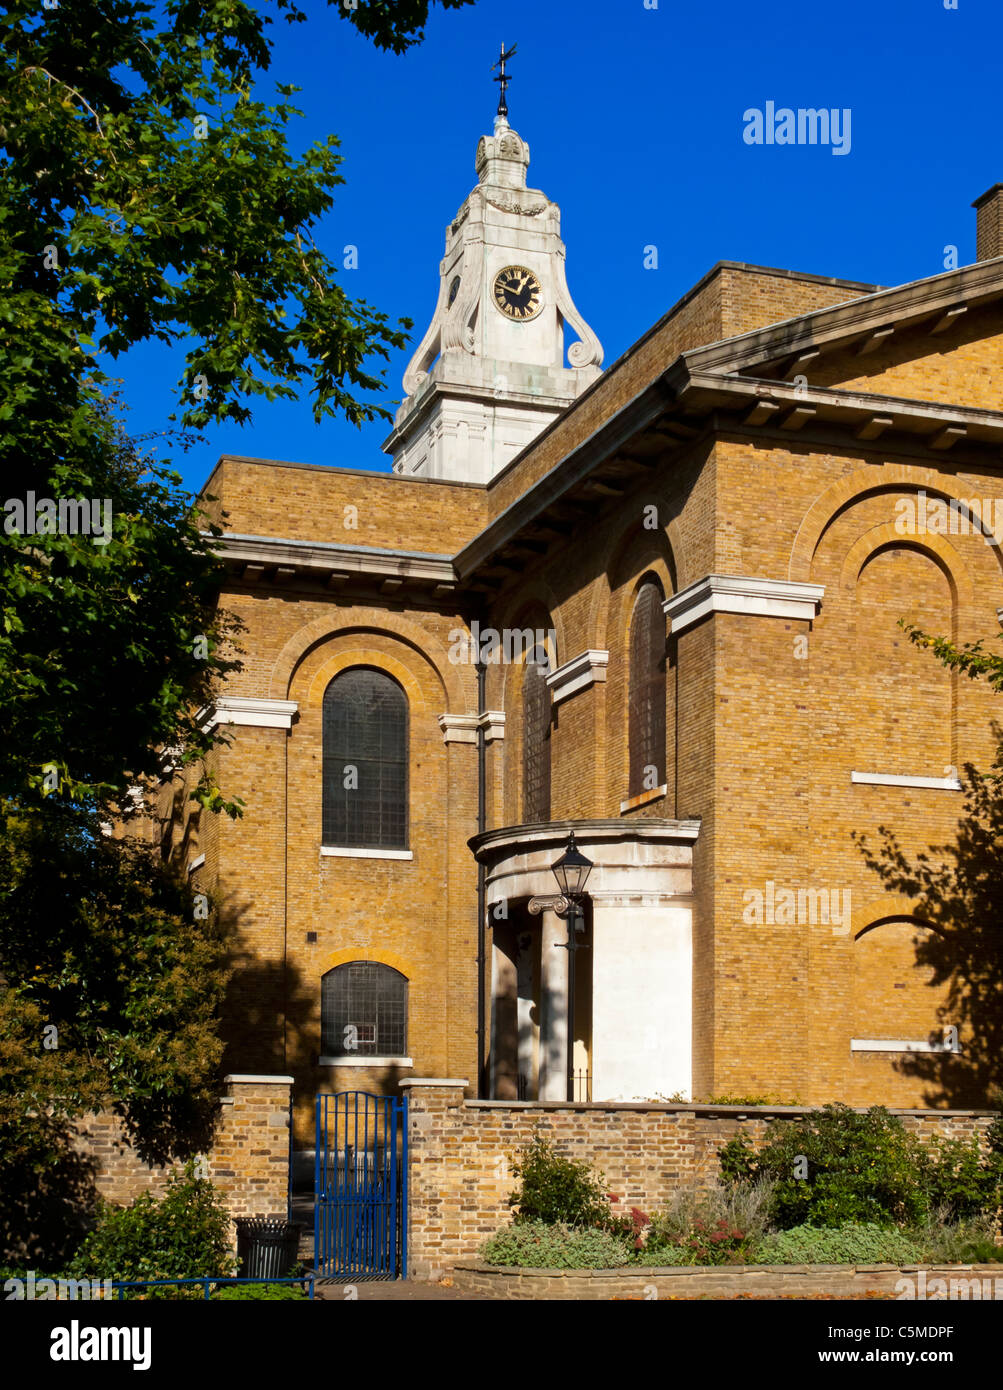 St John at Hackney Church in East London designed by James Spiller and built in 1792 in classical style with a Greek cross plan Stock Photo